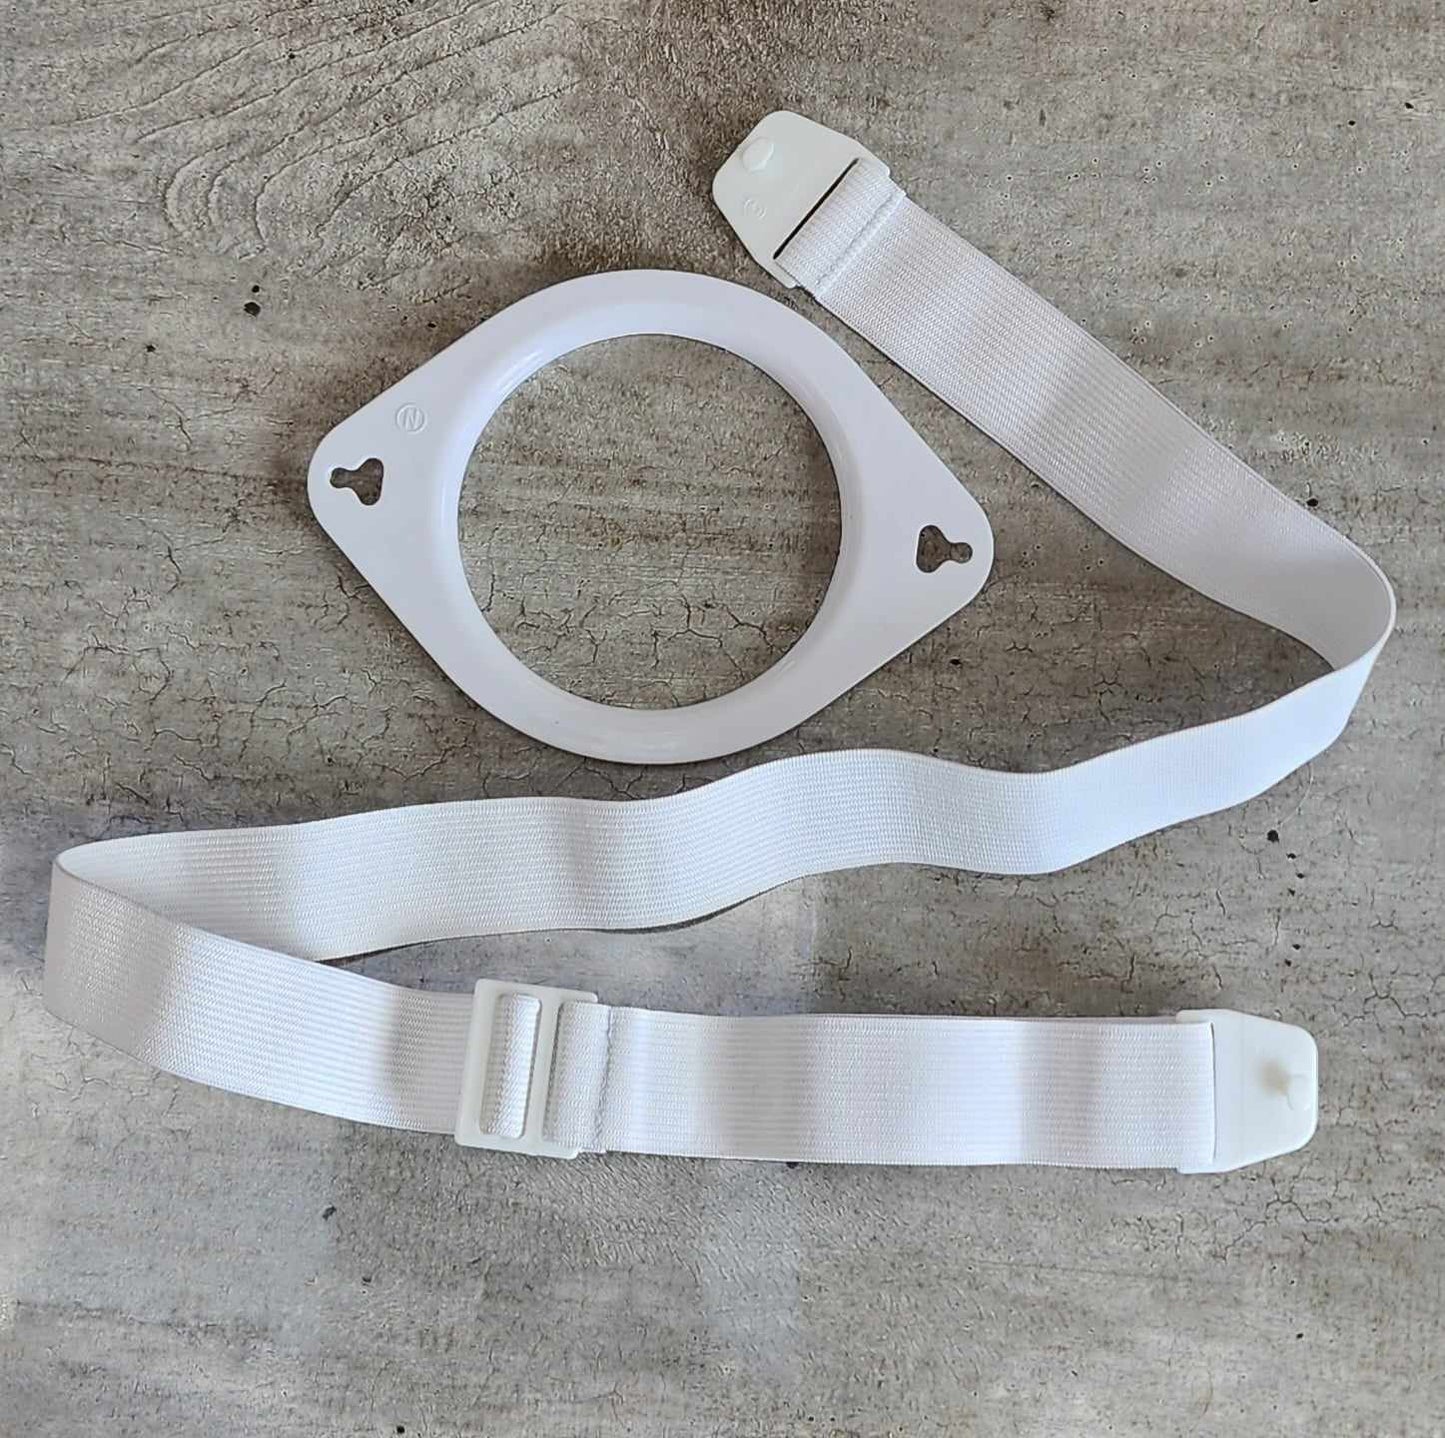 stoma bag support belt in white